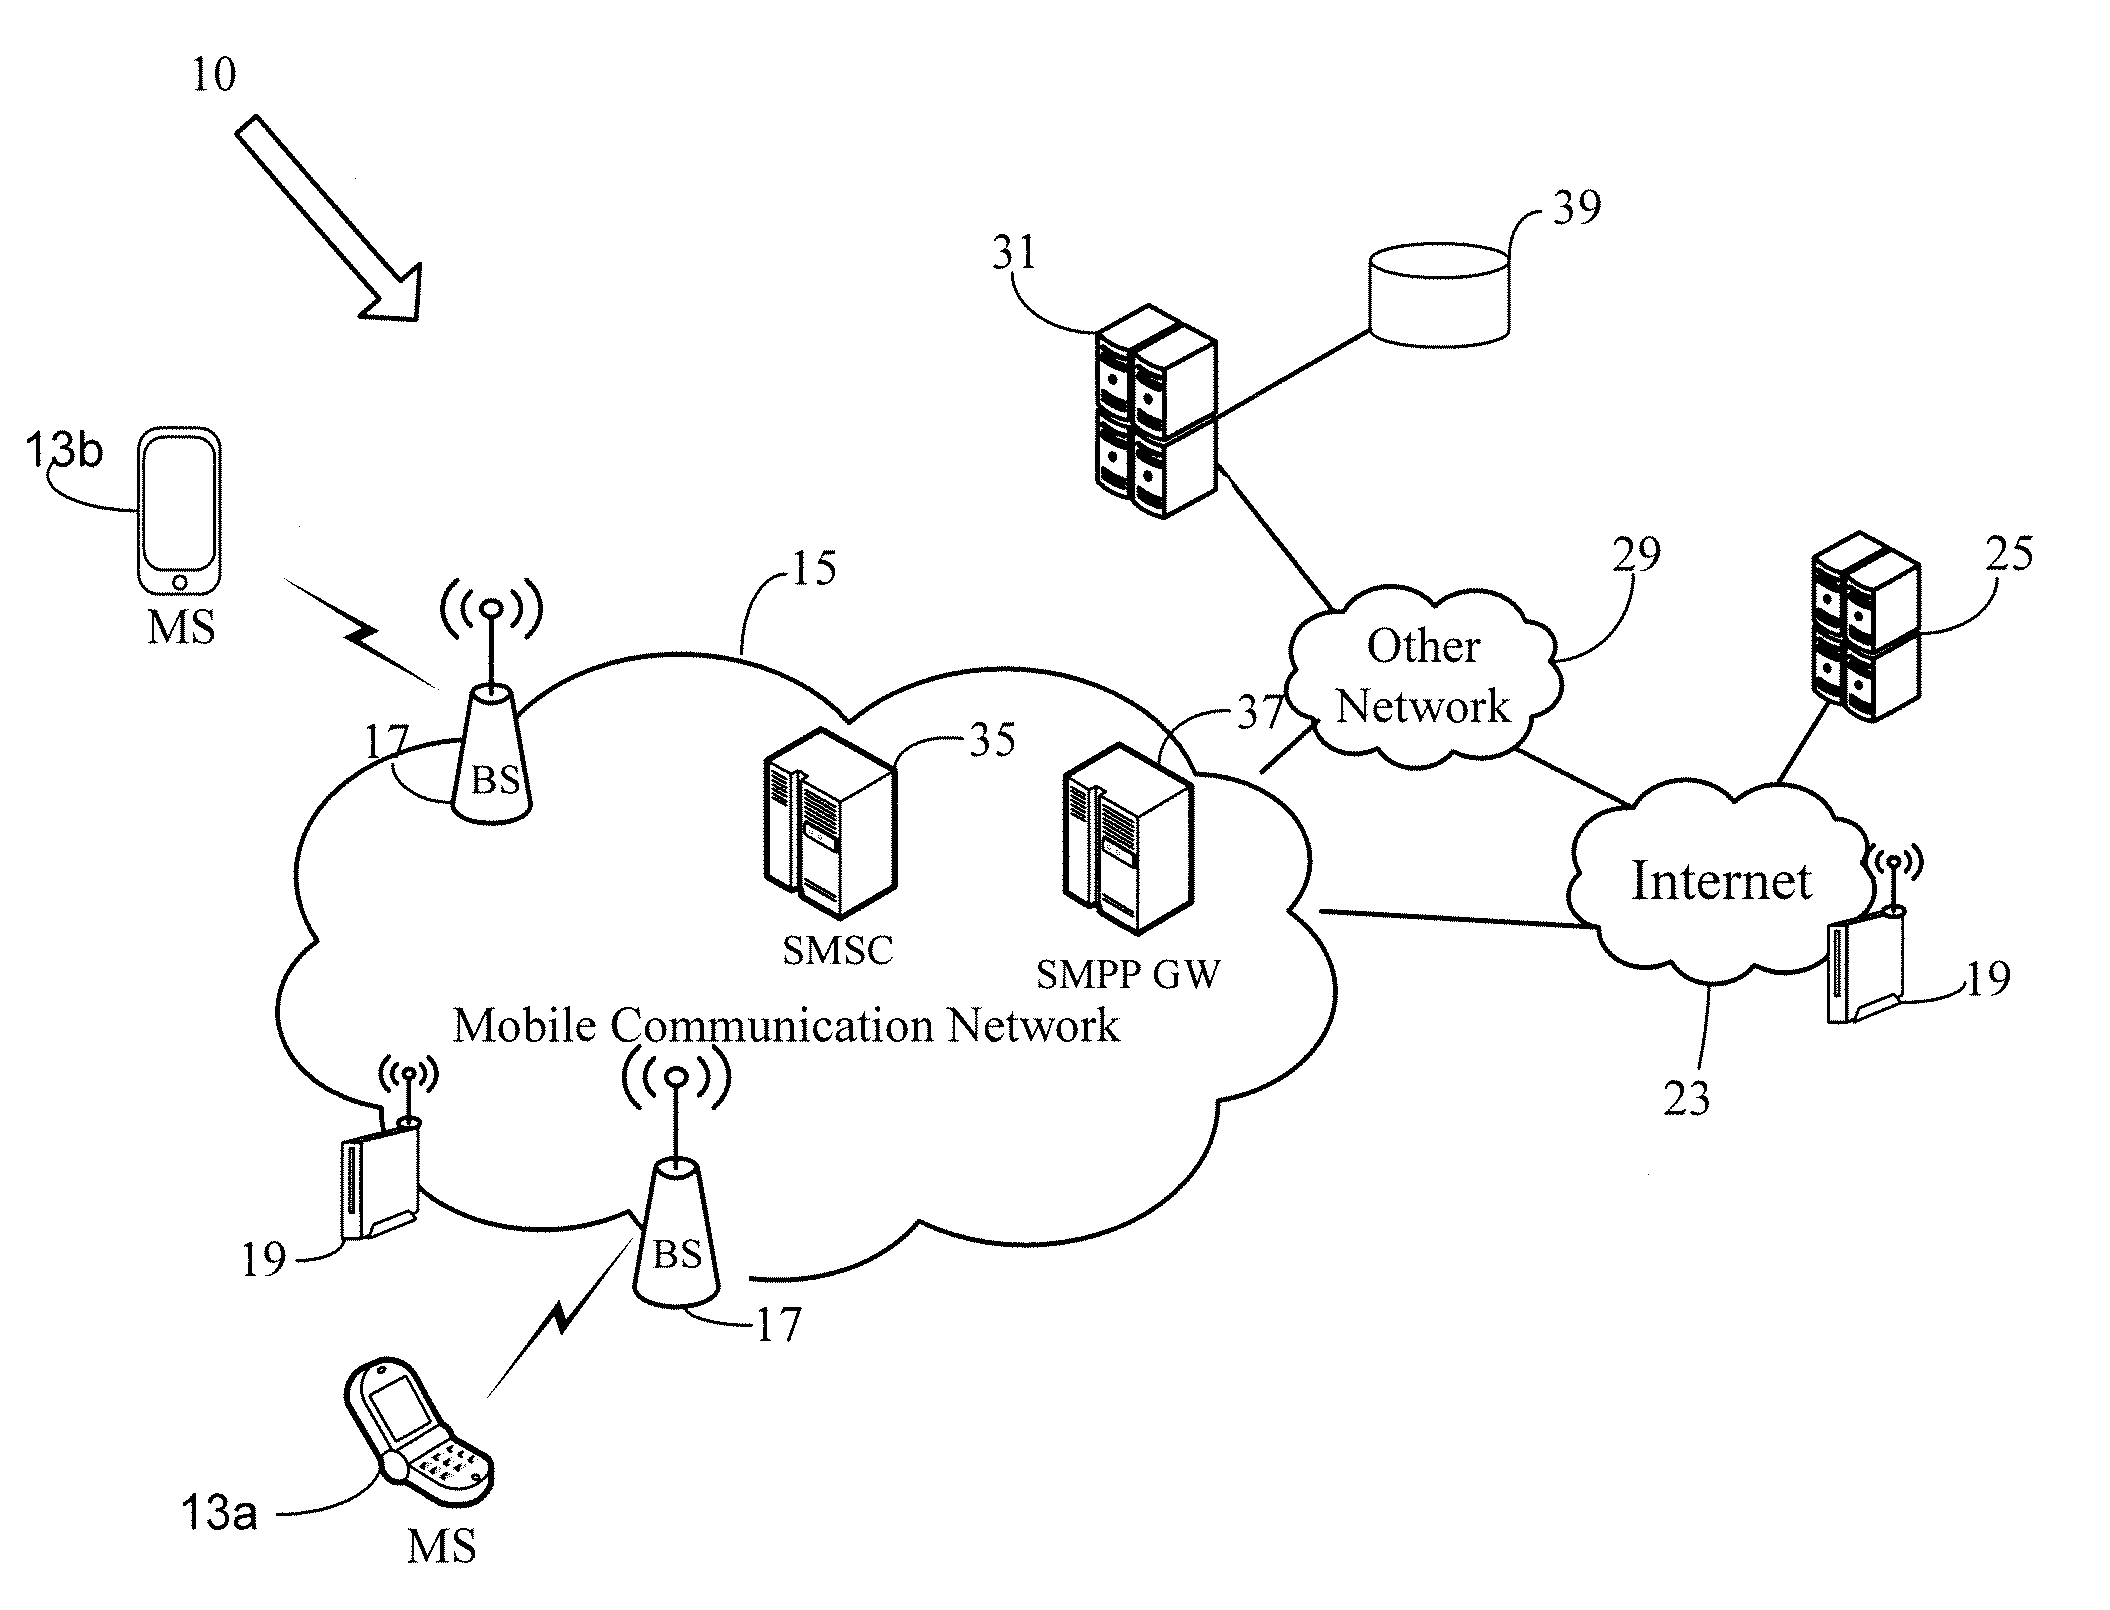 Using mobile messaging service message(s) as bearer for location related communications during voice call